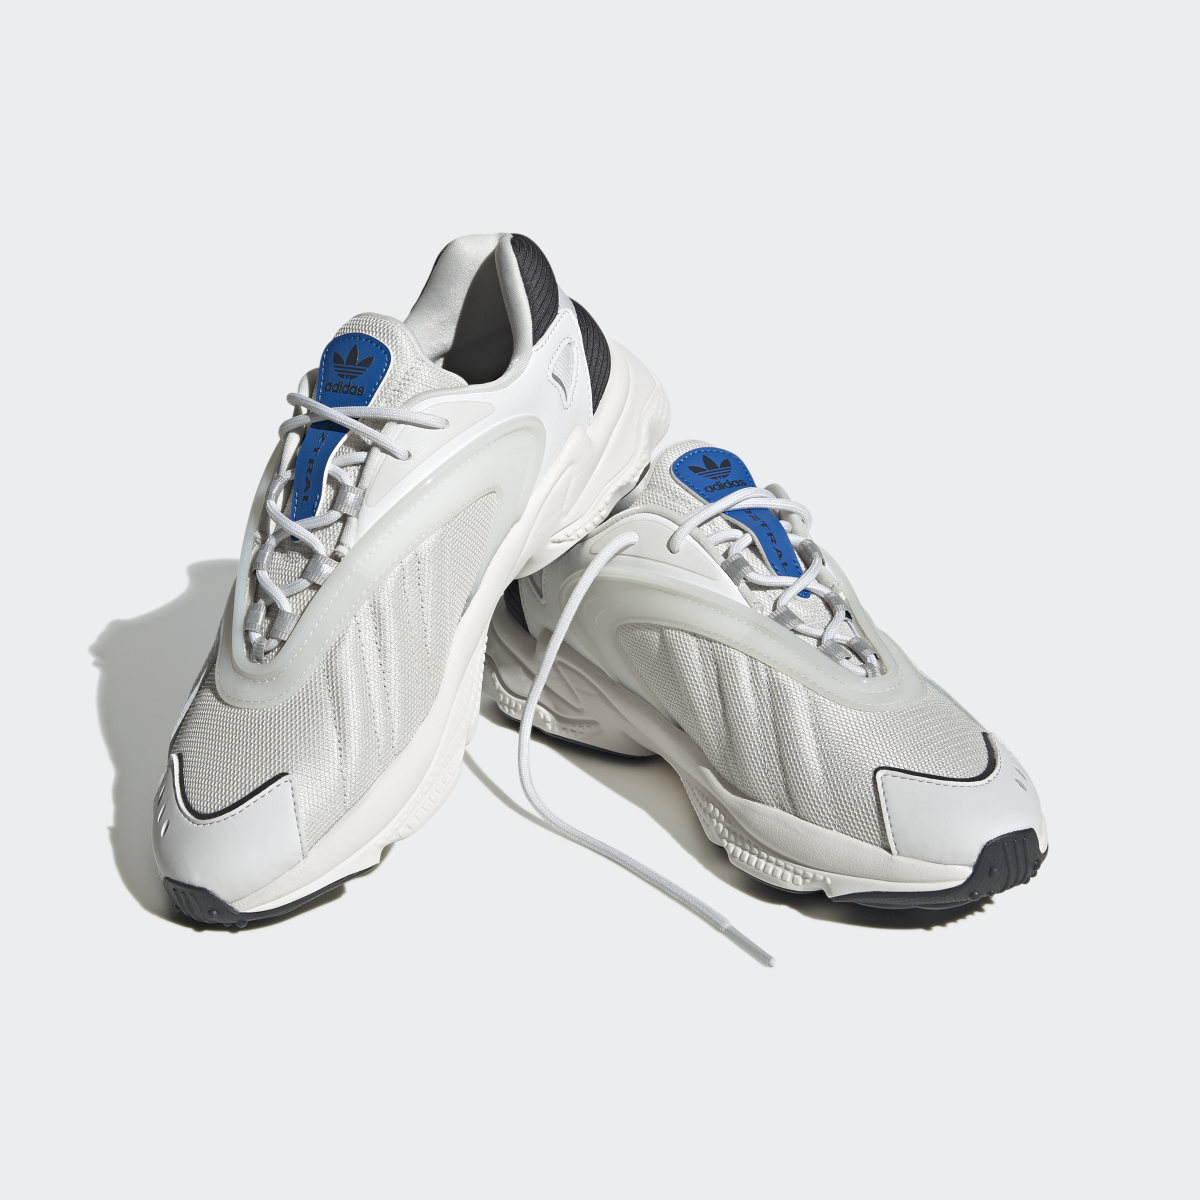 Adidas Chaussure Oztral. 8